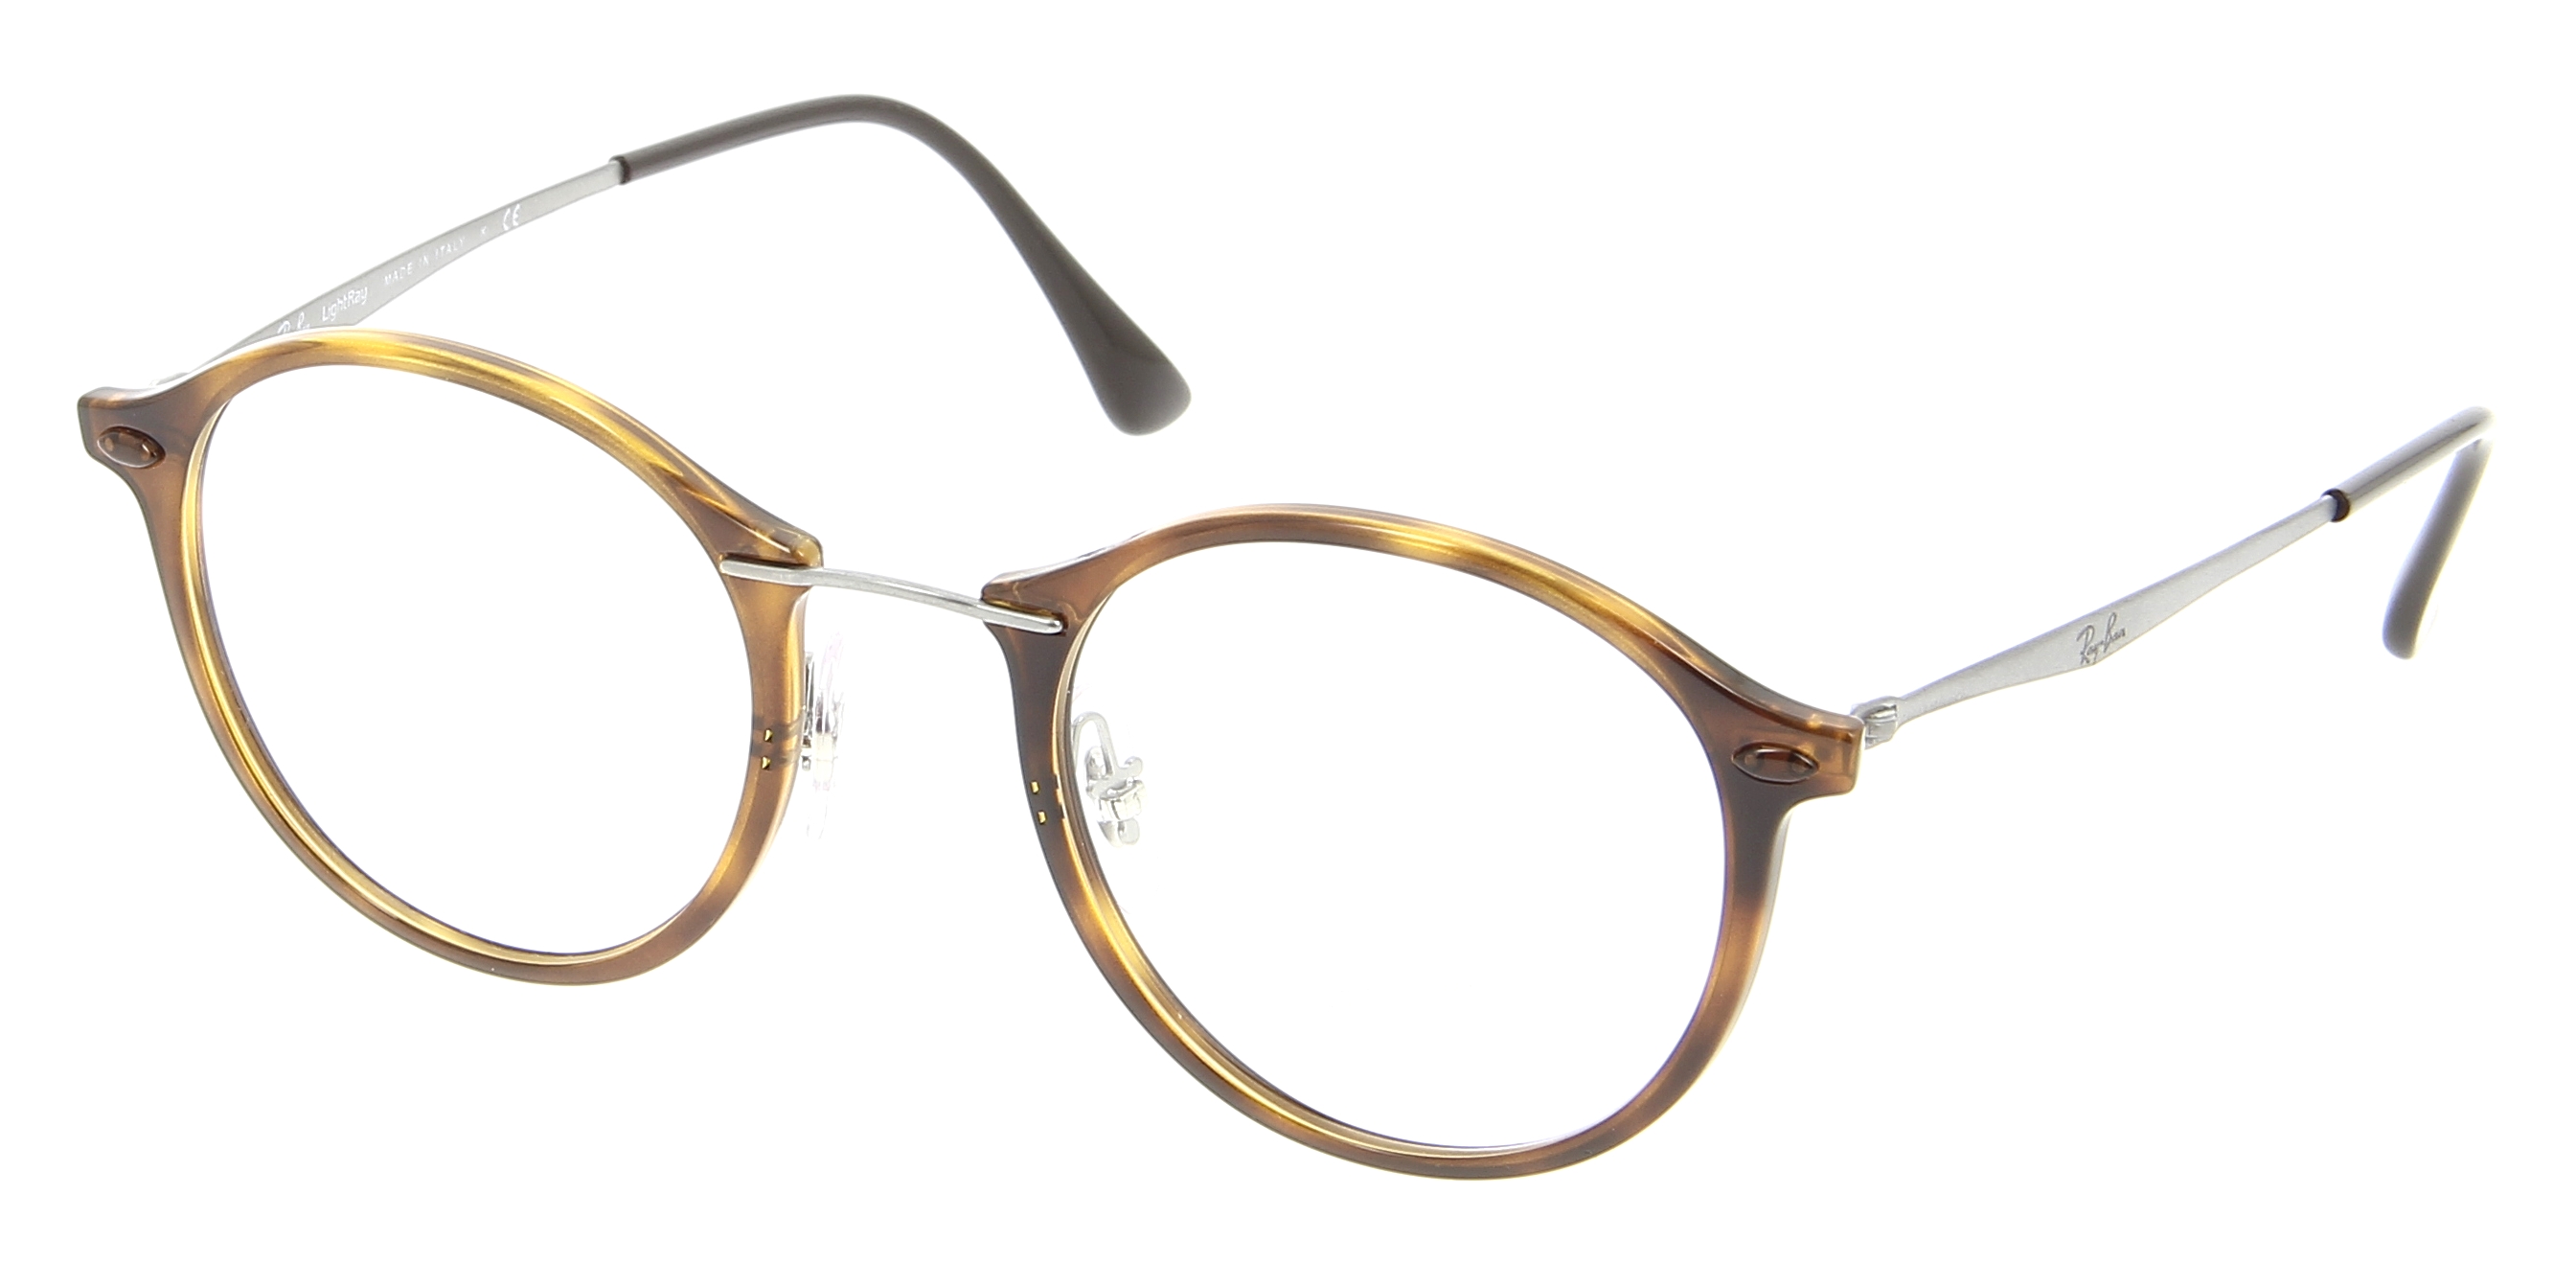 How Much Do Ray Ban Prescription Glasses Cost